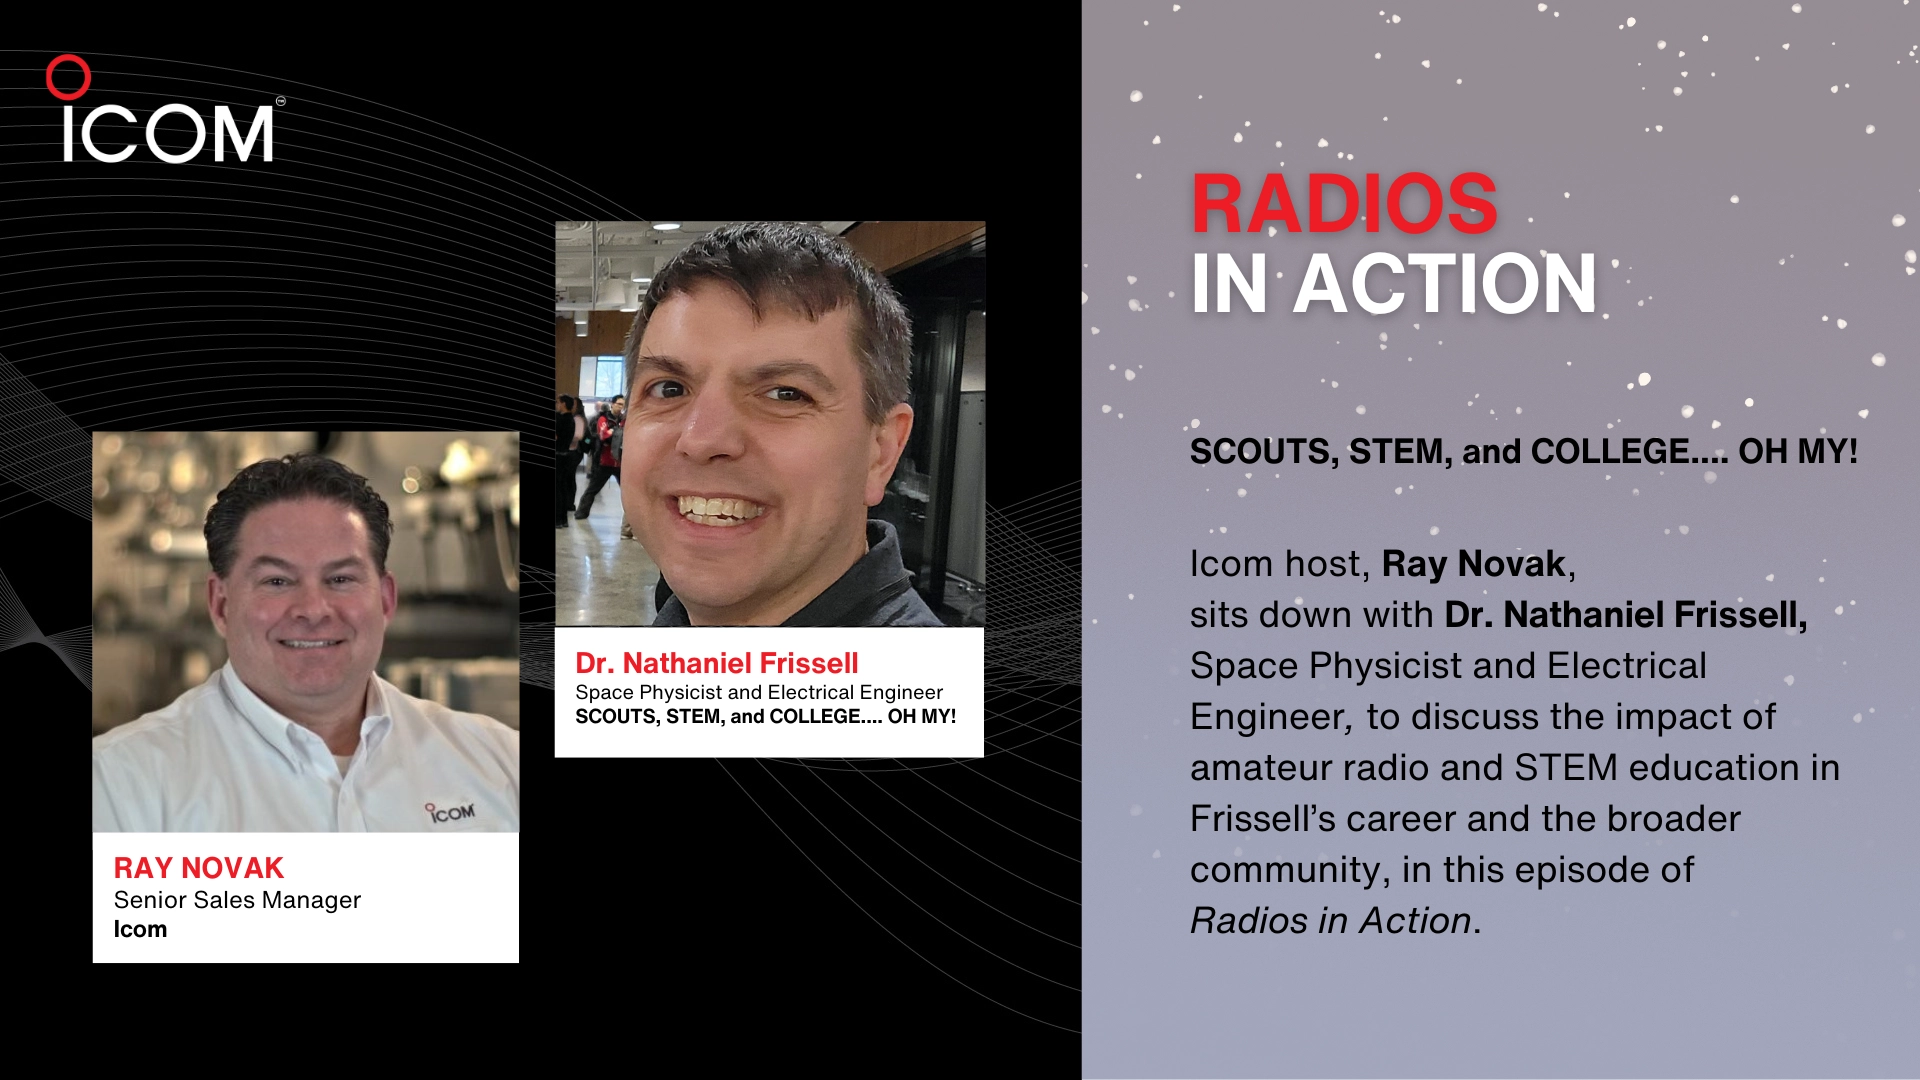 How Amateur Radio Shaped Dr Frissell’s Career in Space Science: A Journey from Boy Scouts